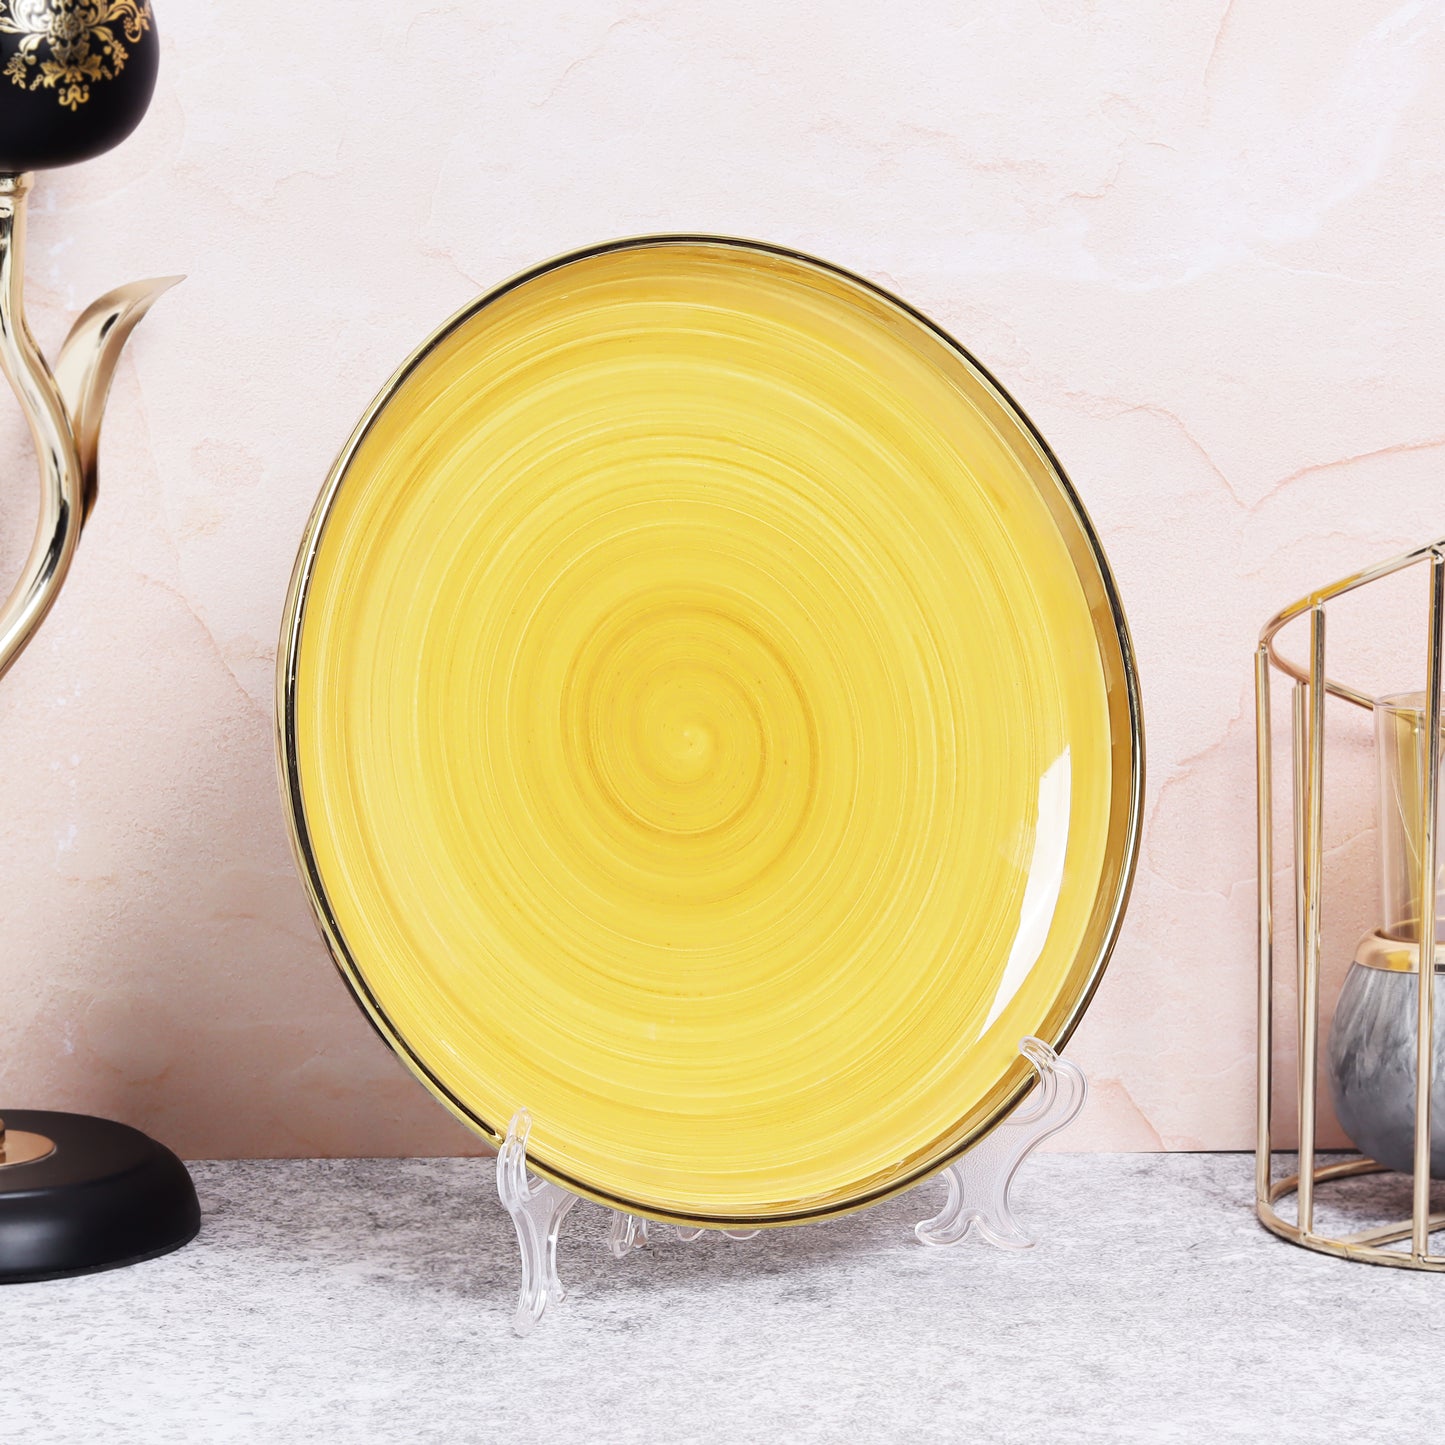 Classic ceramic dinner plate in pristine yellow- perfect for elegant dining settings